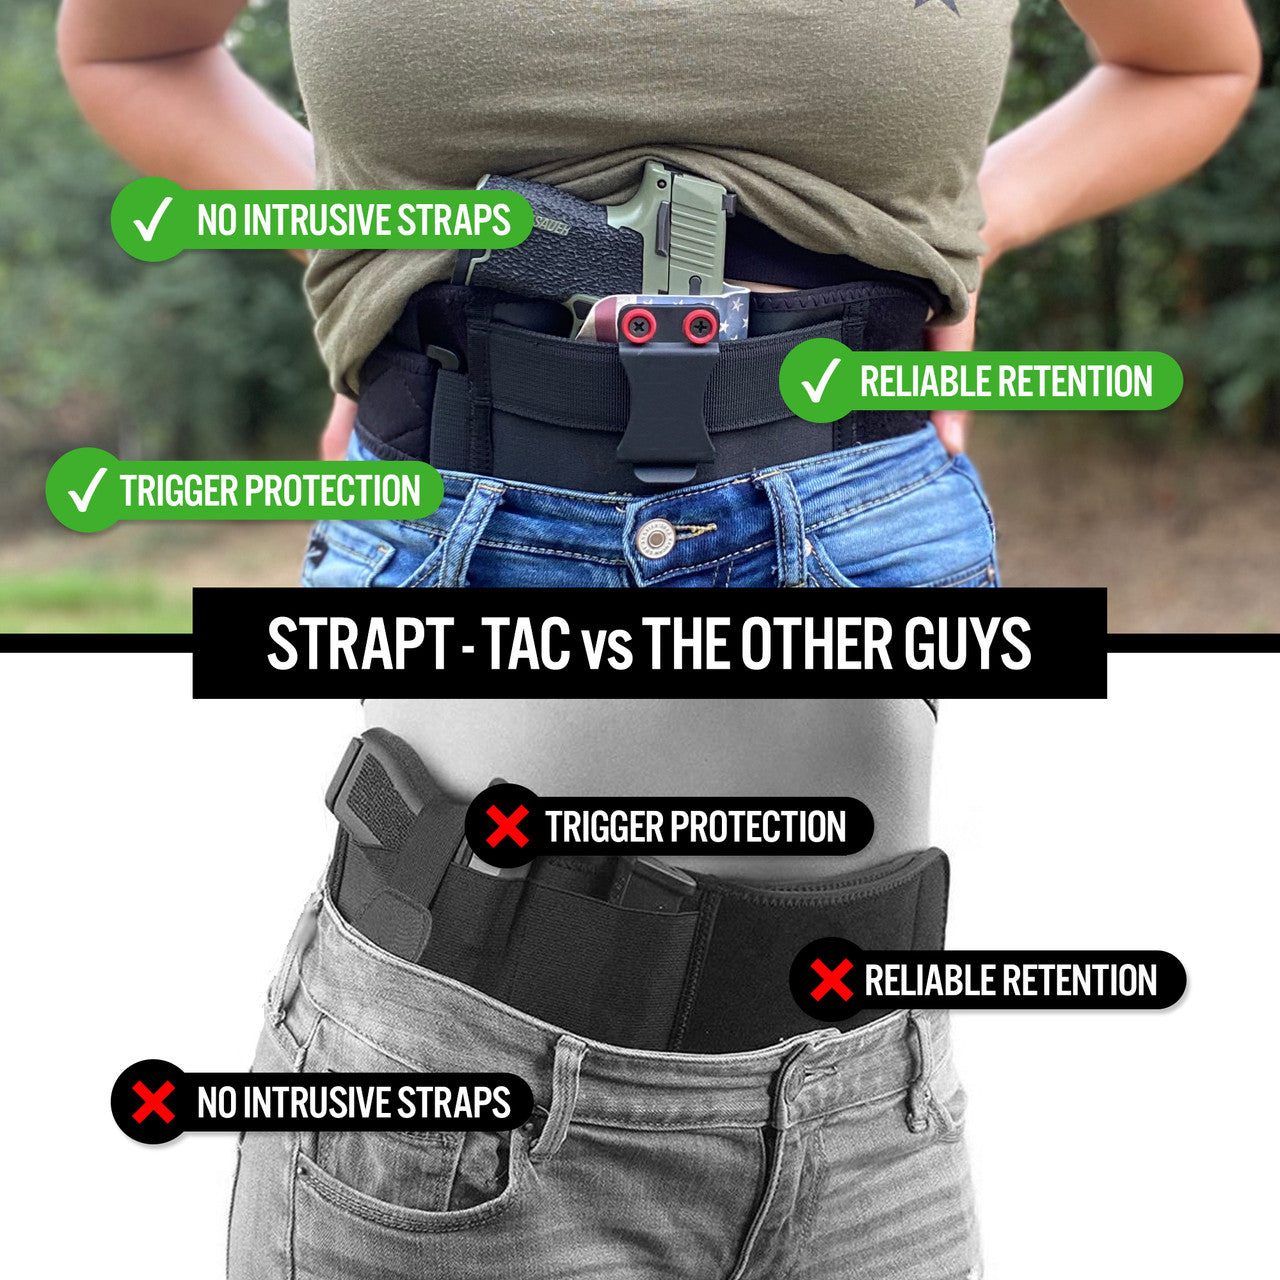 No Belt? No Problem. Introducing the new MFT Belly Band Holster